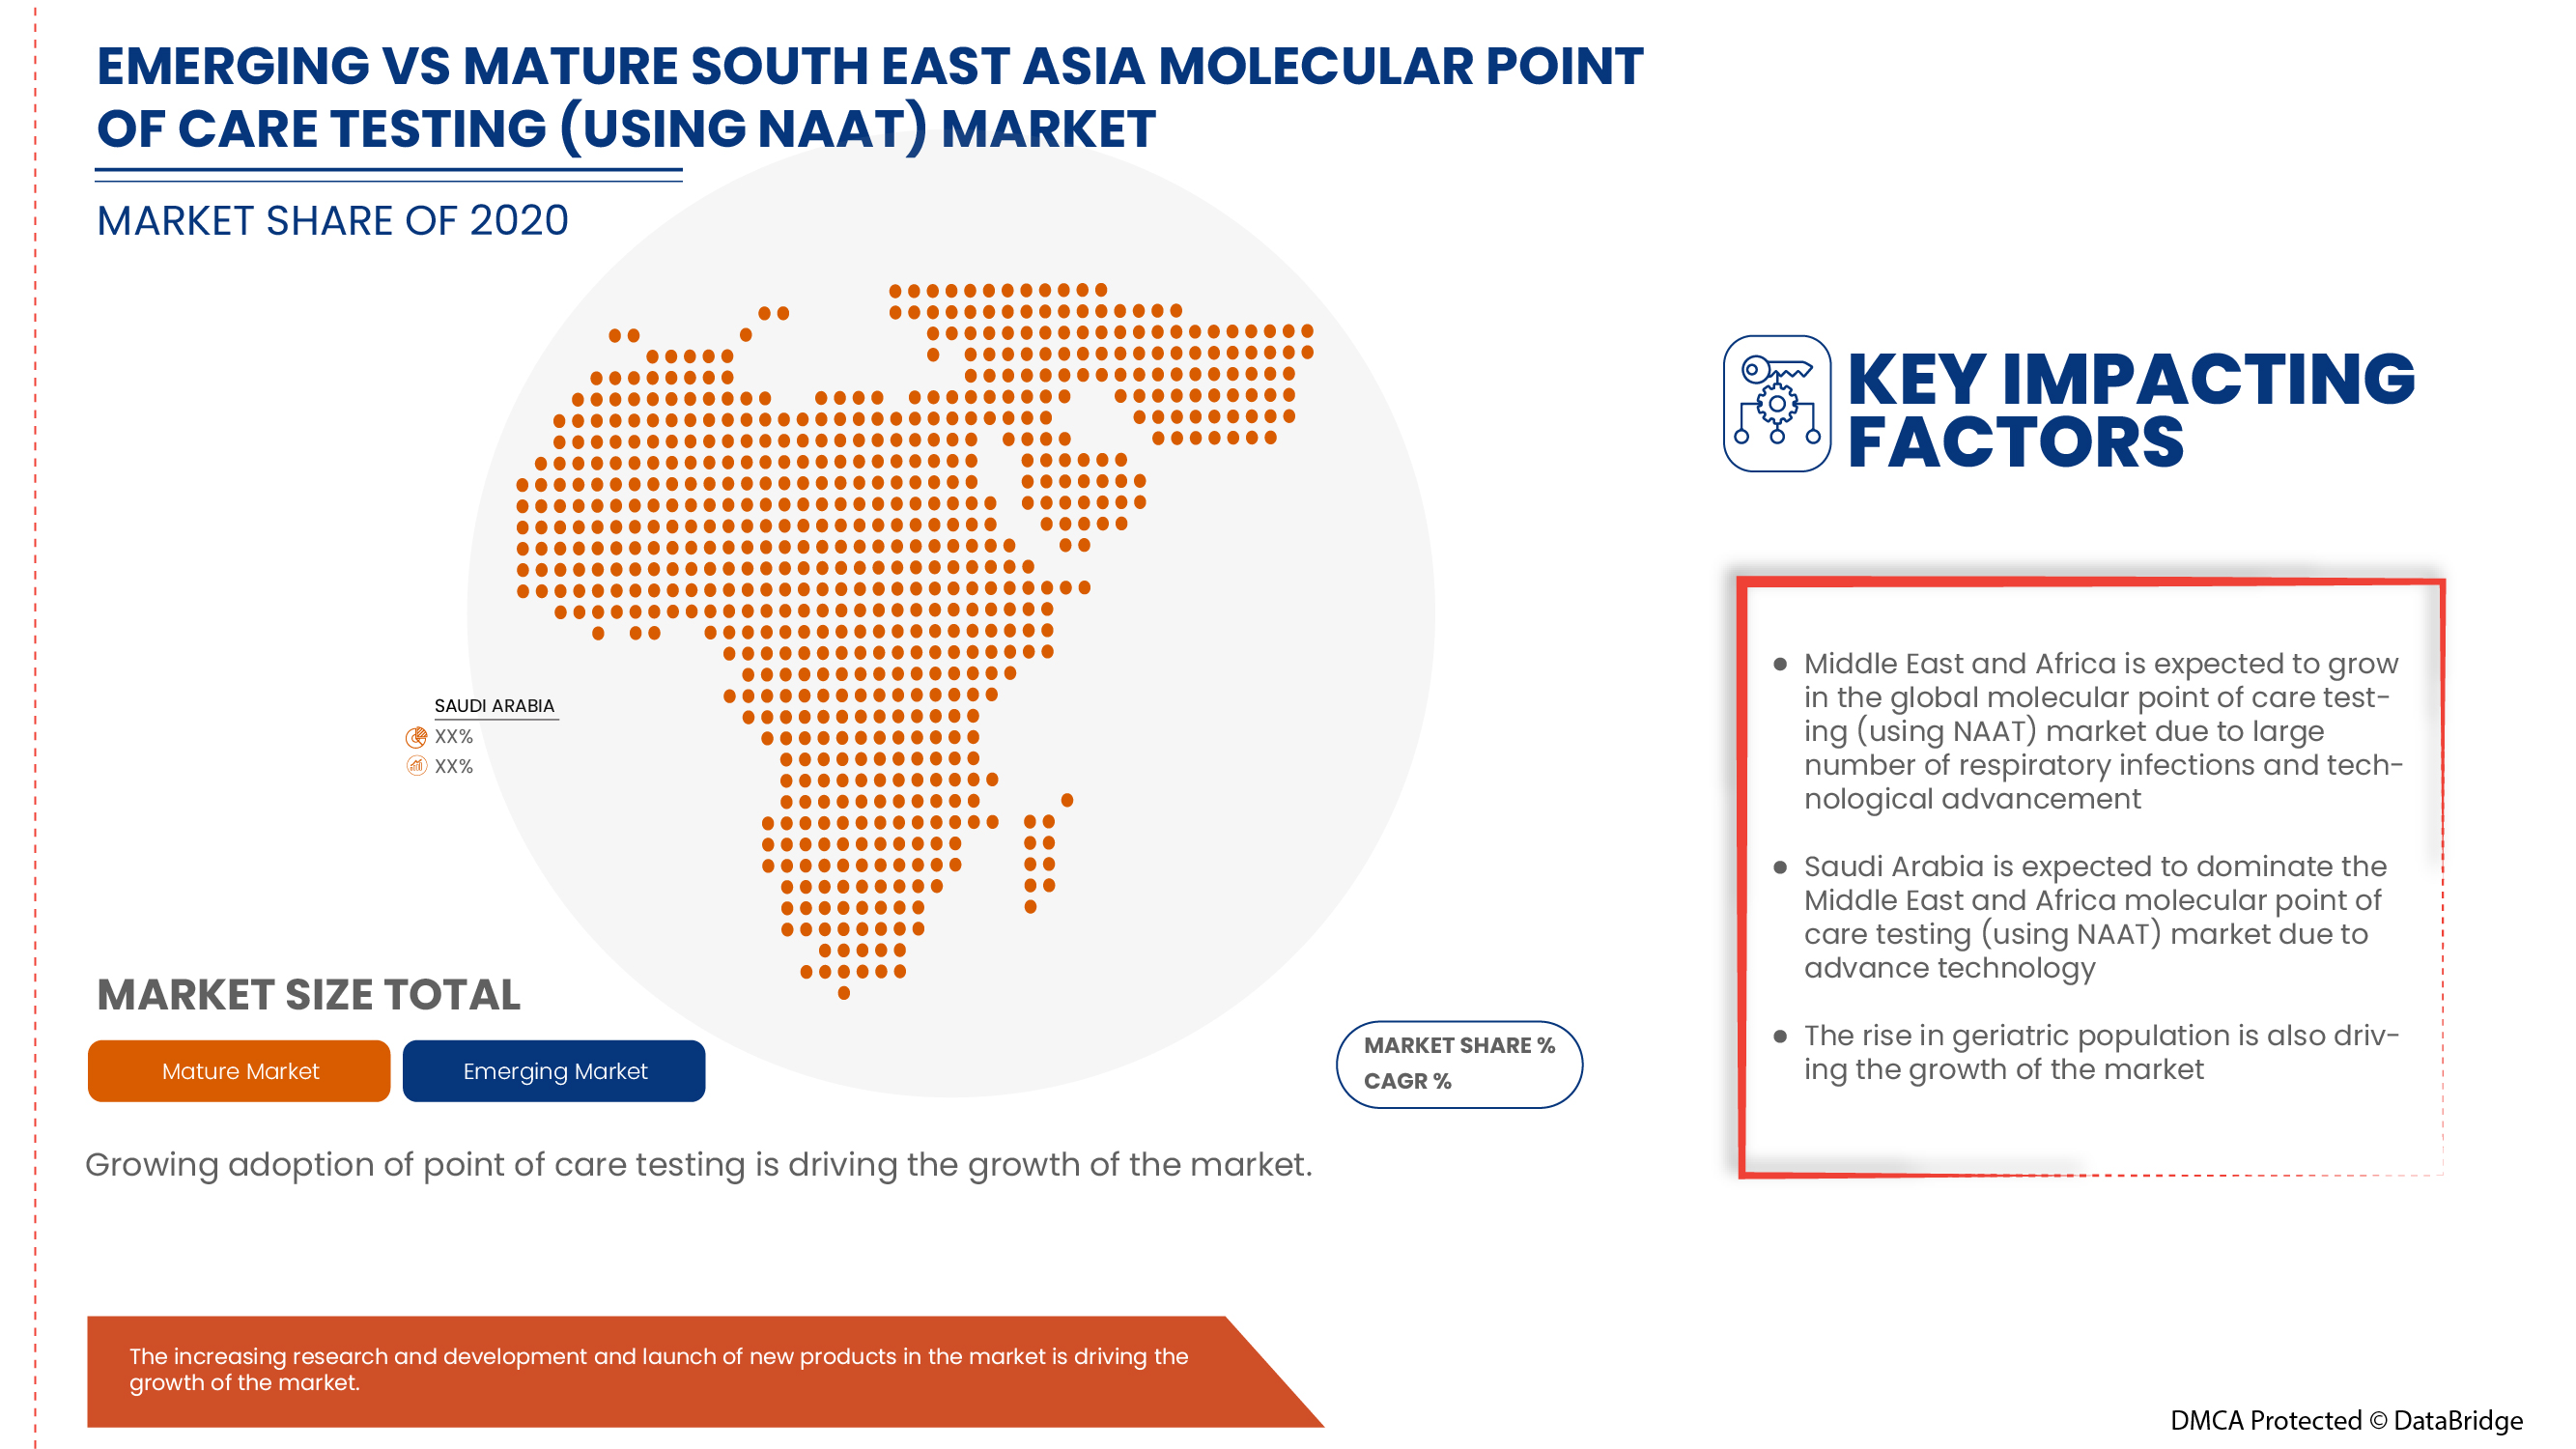 South East Asia Molecular Point of Care Testing (using NAAT) Market